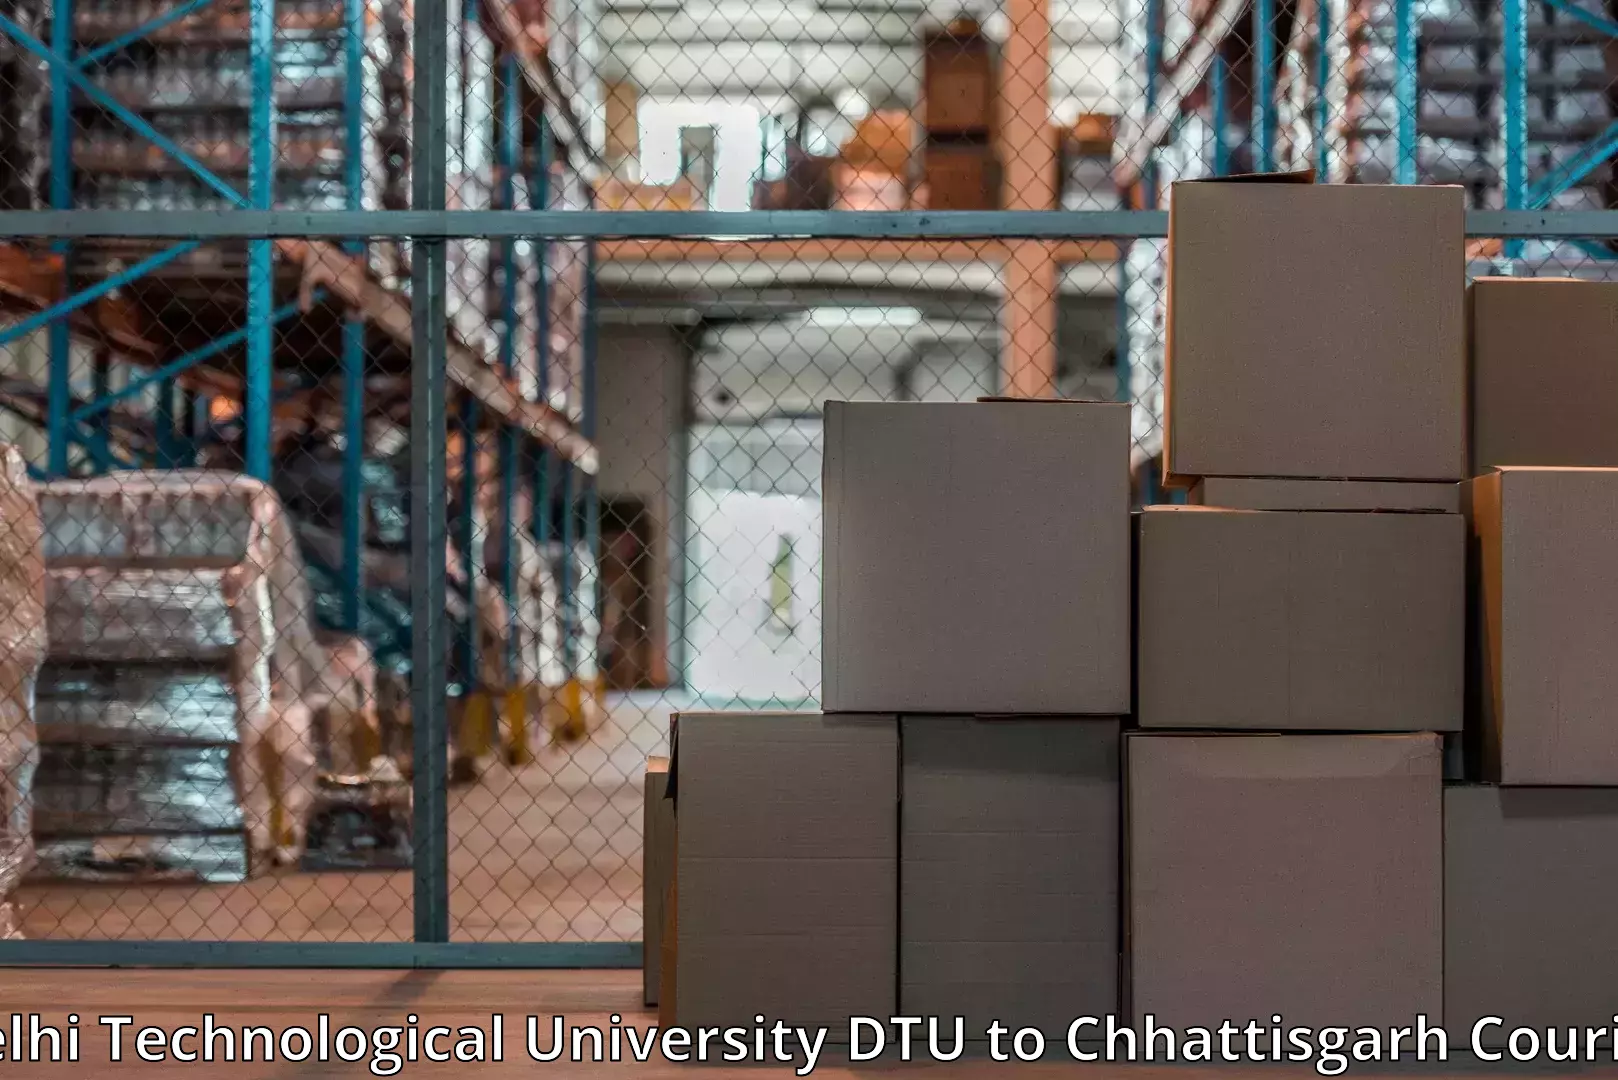 Seamless moving process Delhi Technological University DTU to bagbahra